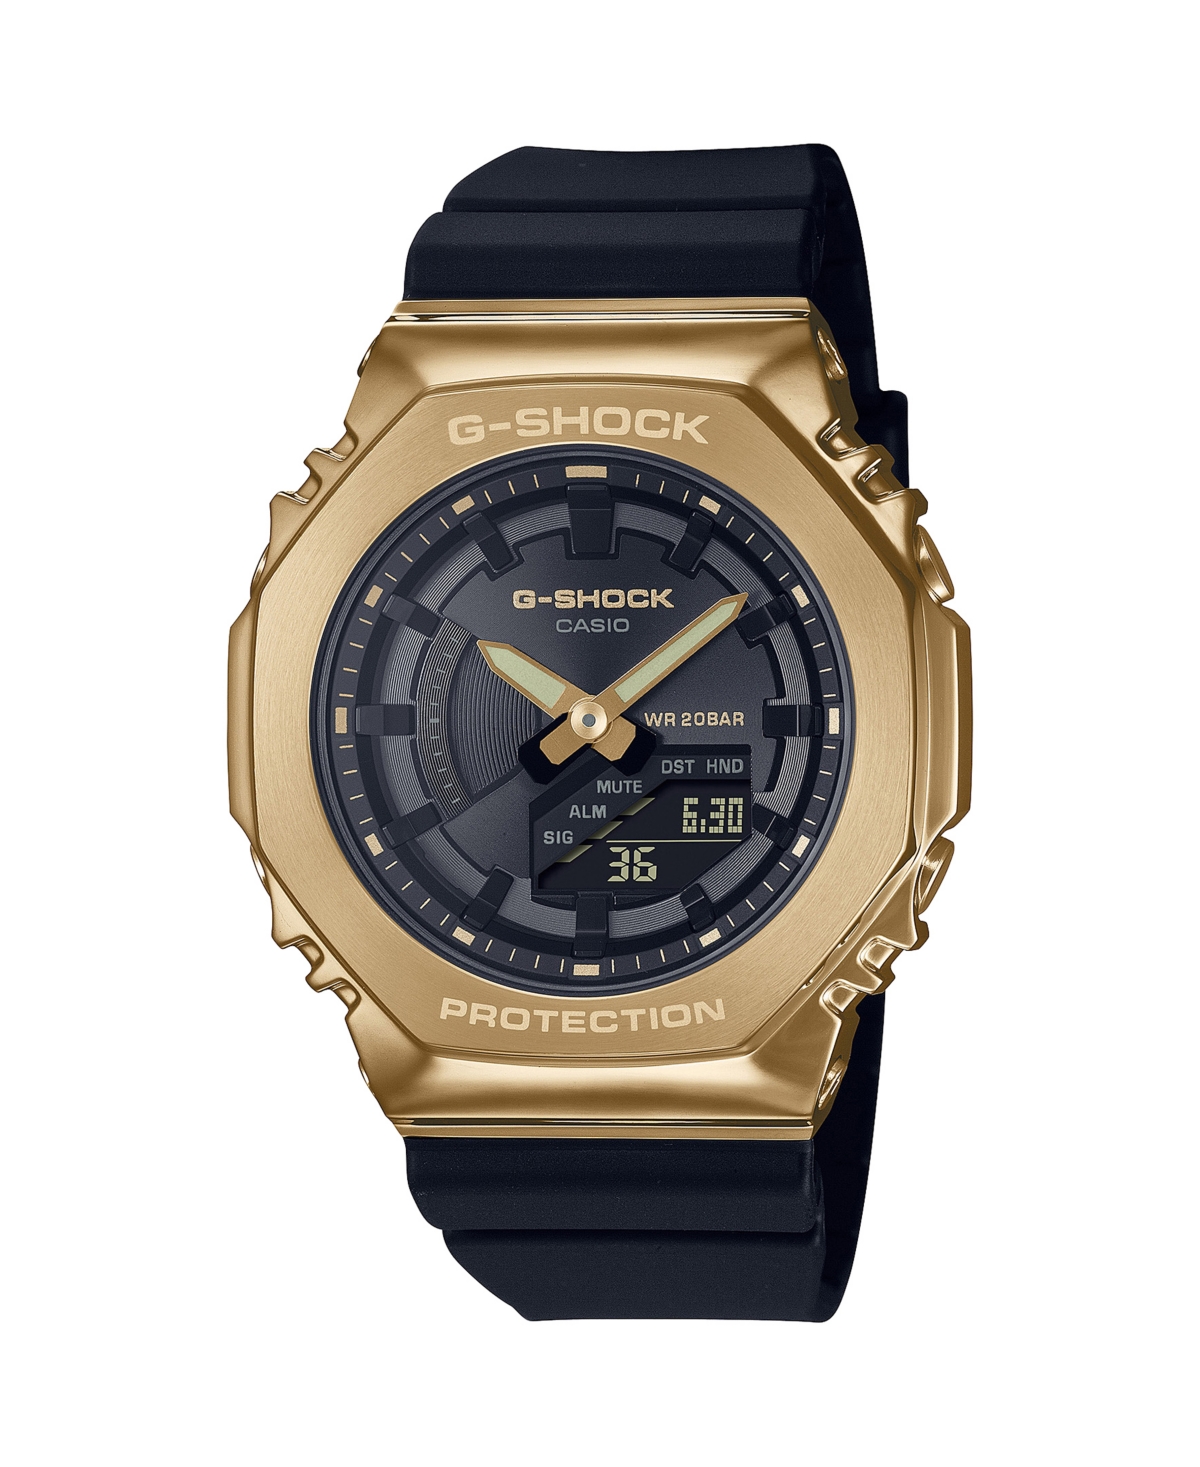 G-SHOCK G-SHOCK UNISEX GOLD-TONE AND BLACK RESIN STRAP WATCH 40.4MM GMS2100GB-1A